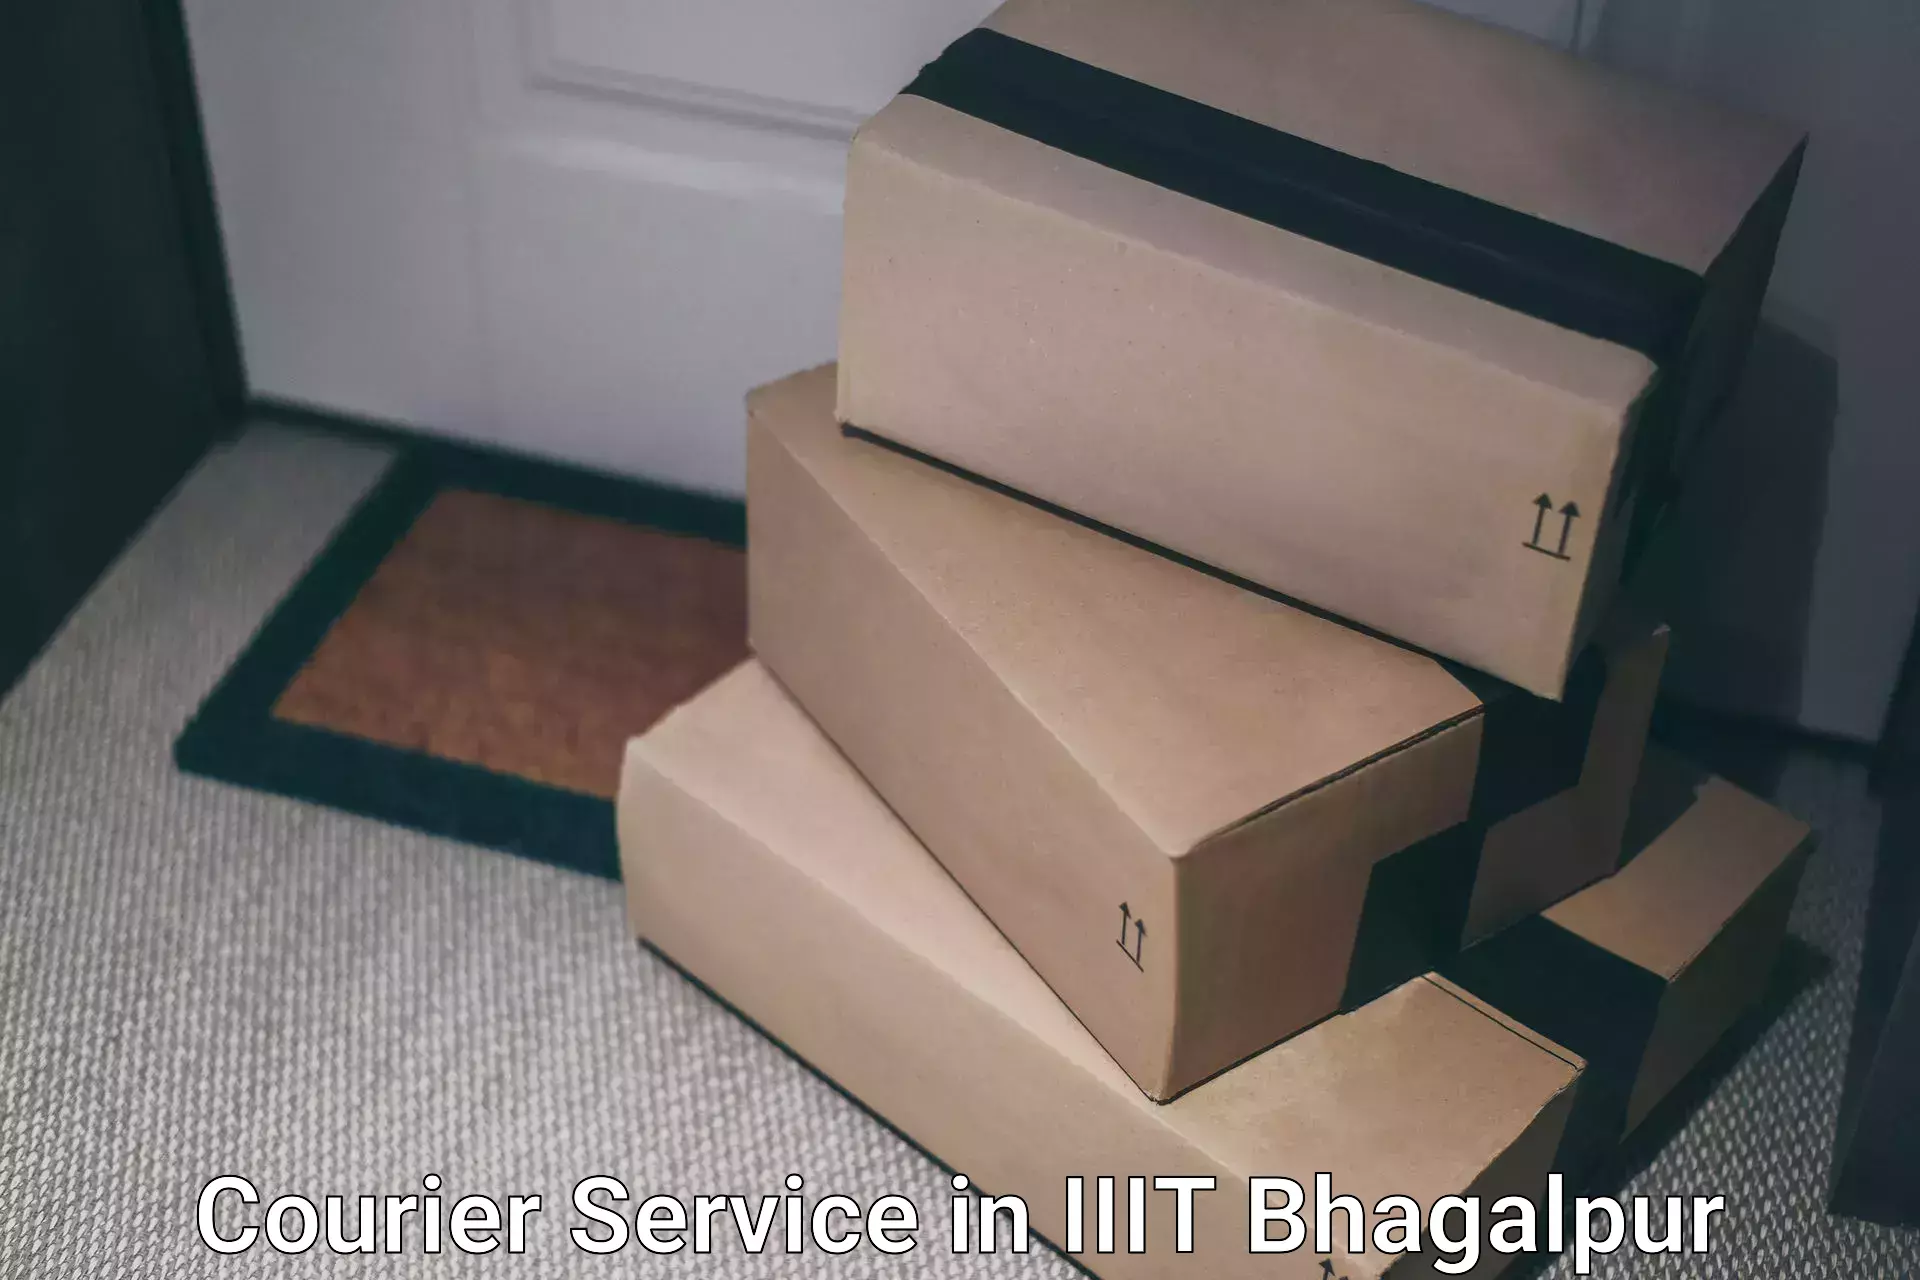 Cash on delivery service in IIIT Bhagalpur